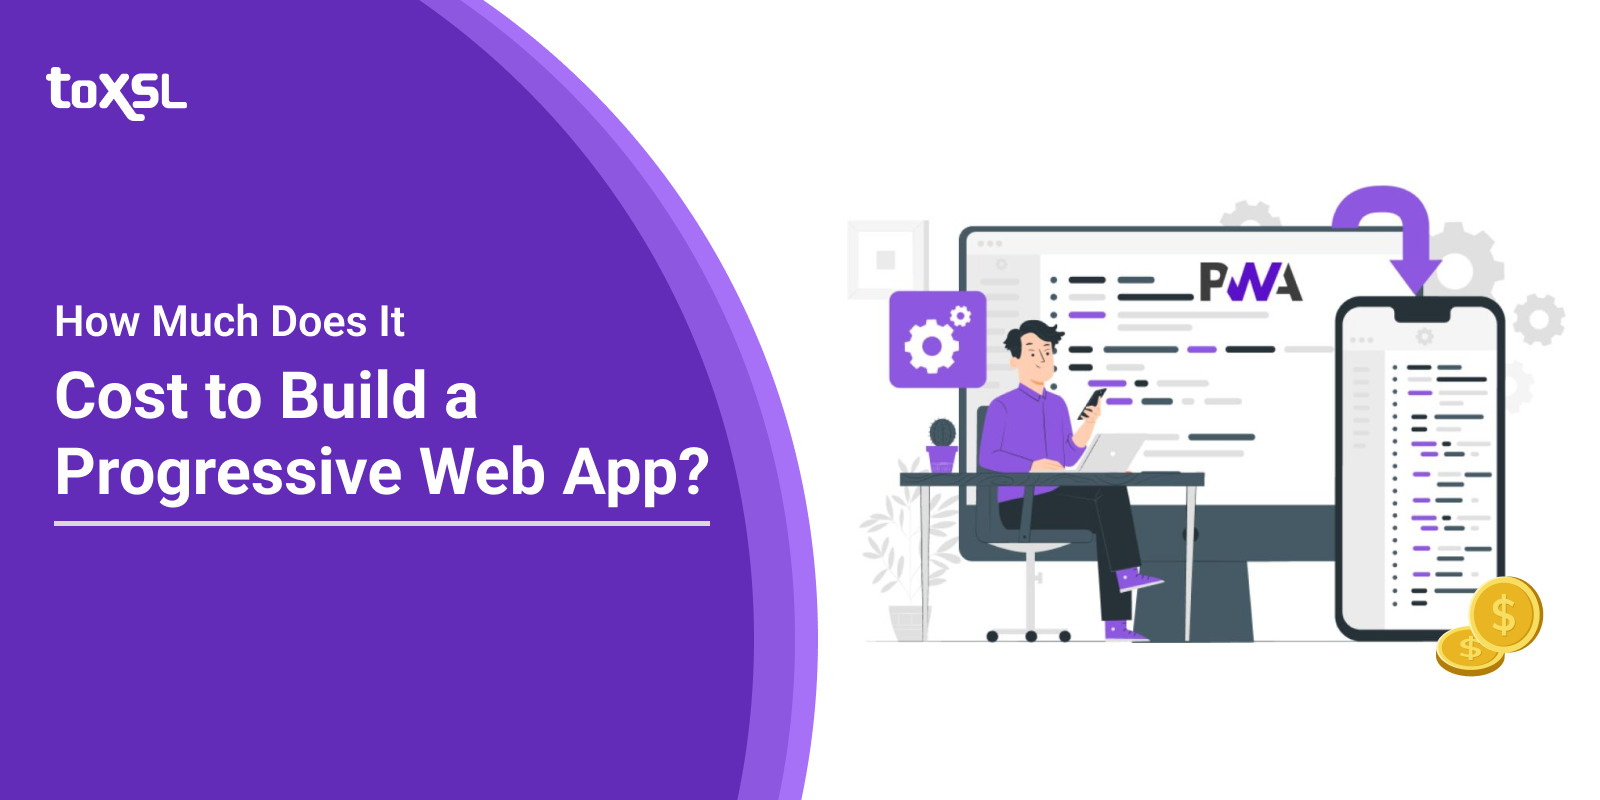 How Much Does It Cost to Build a Progressive Web App?